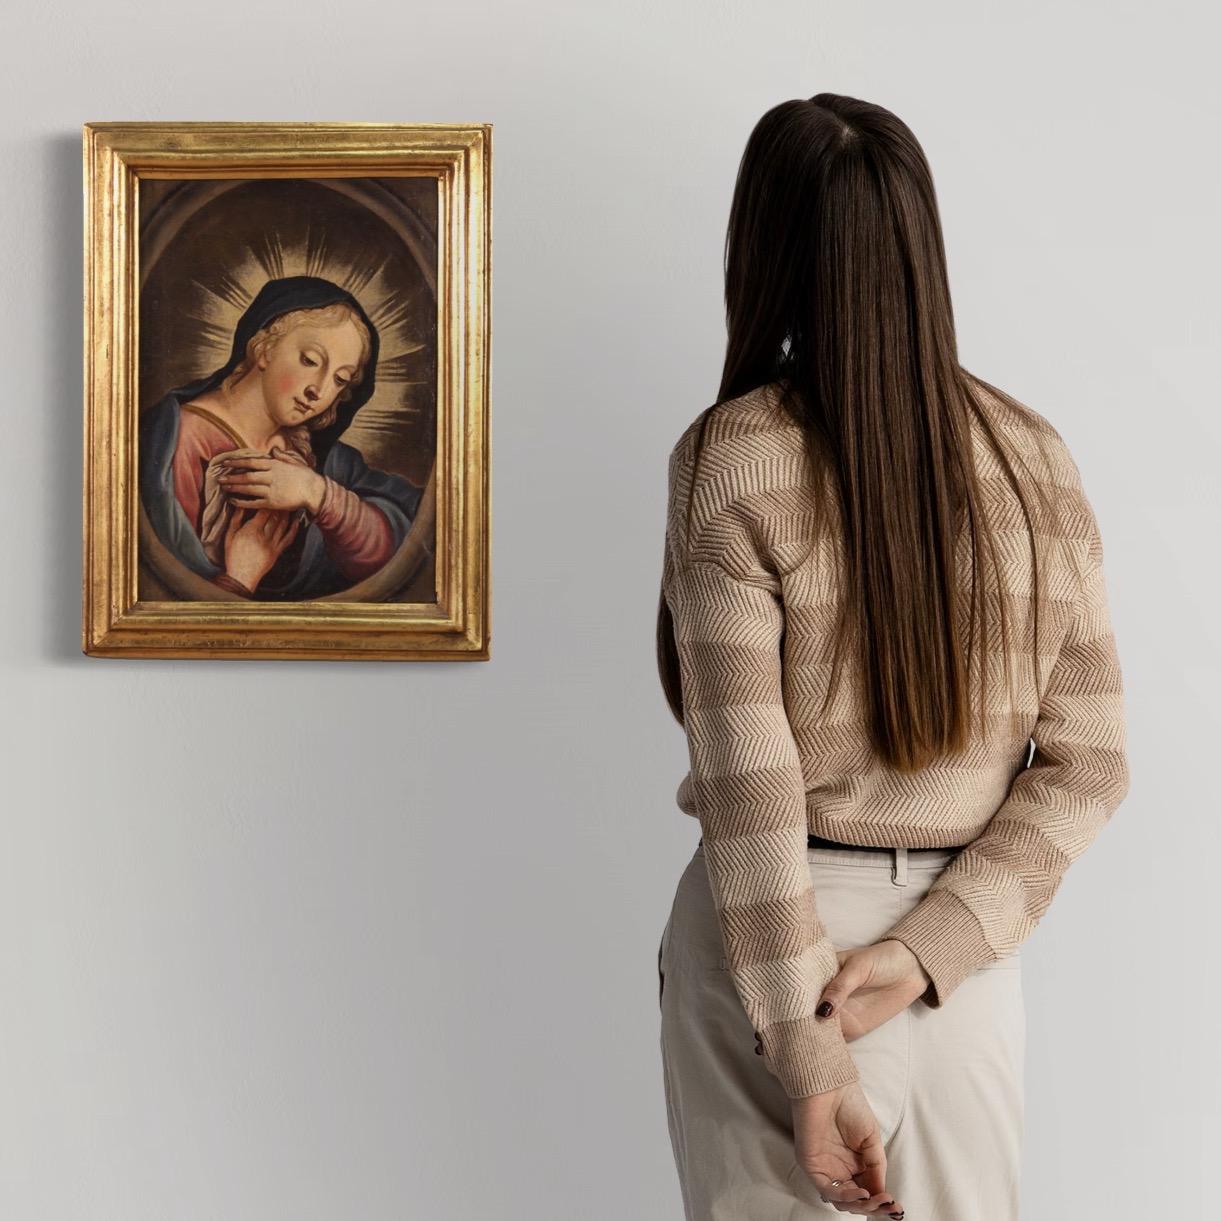 Antique Italian painting from the second half of the 18th century. Oil on canvas artwork depicting a religious subject, Madonna praying, of good pictorial quality. This is a very widespread iconography since the 17th century in private devotional